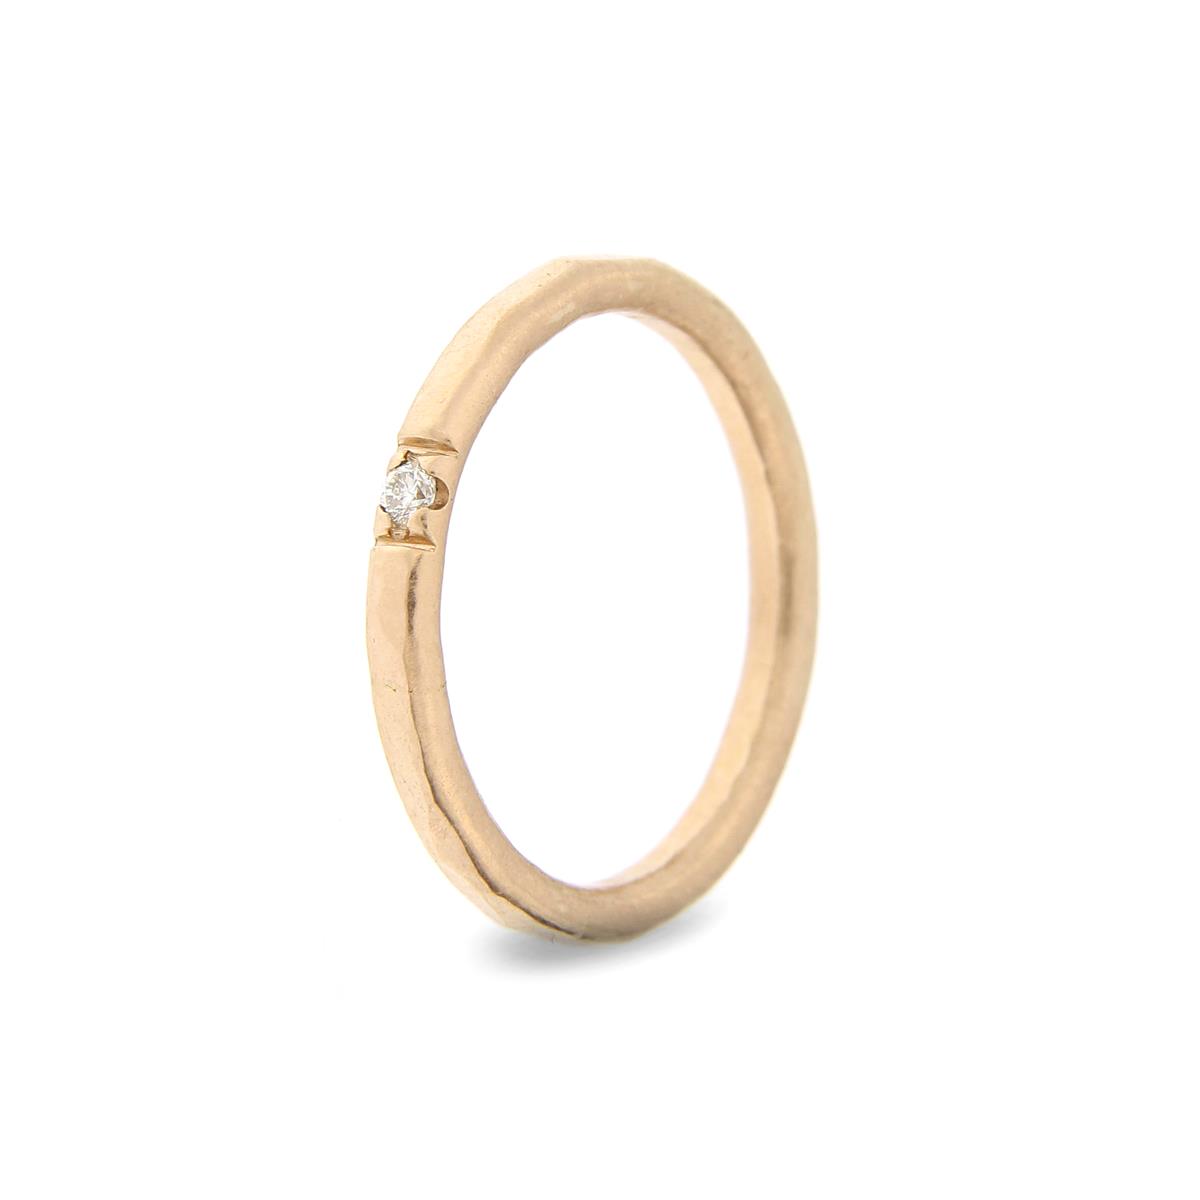 Katie g. Jewellery - Hammered Ring 2,0mm - Rosé Gold 2 + 1 Diamond